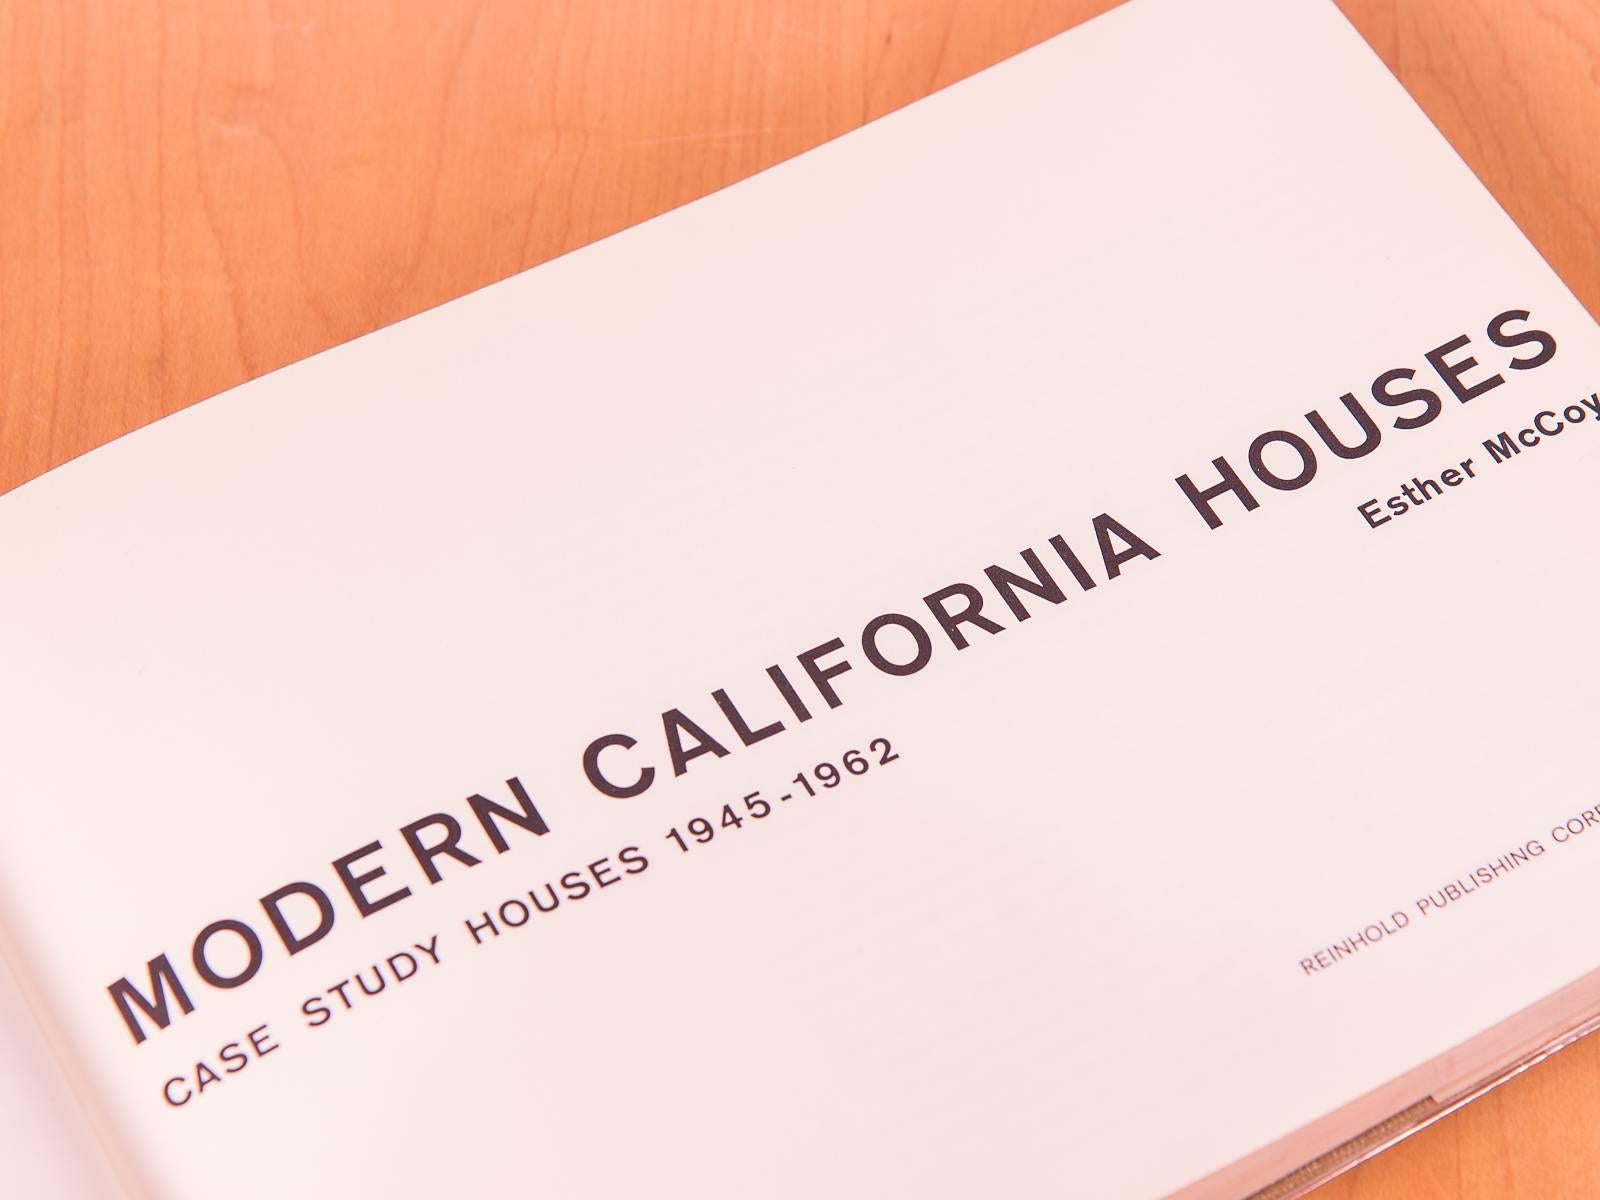 Modern California Houses is an in-depth look at the visionary designs of Mid-Century case study homes by architectural critic and historian Esther McCoy. Scarce, out of print, first edition from 1962. Published by New York: Reinhold Publishing